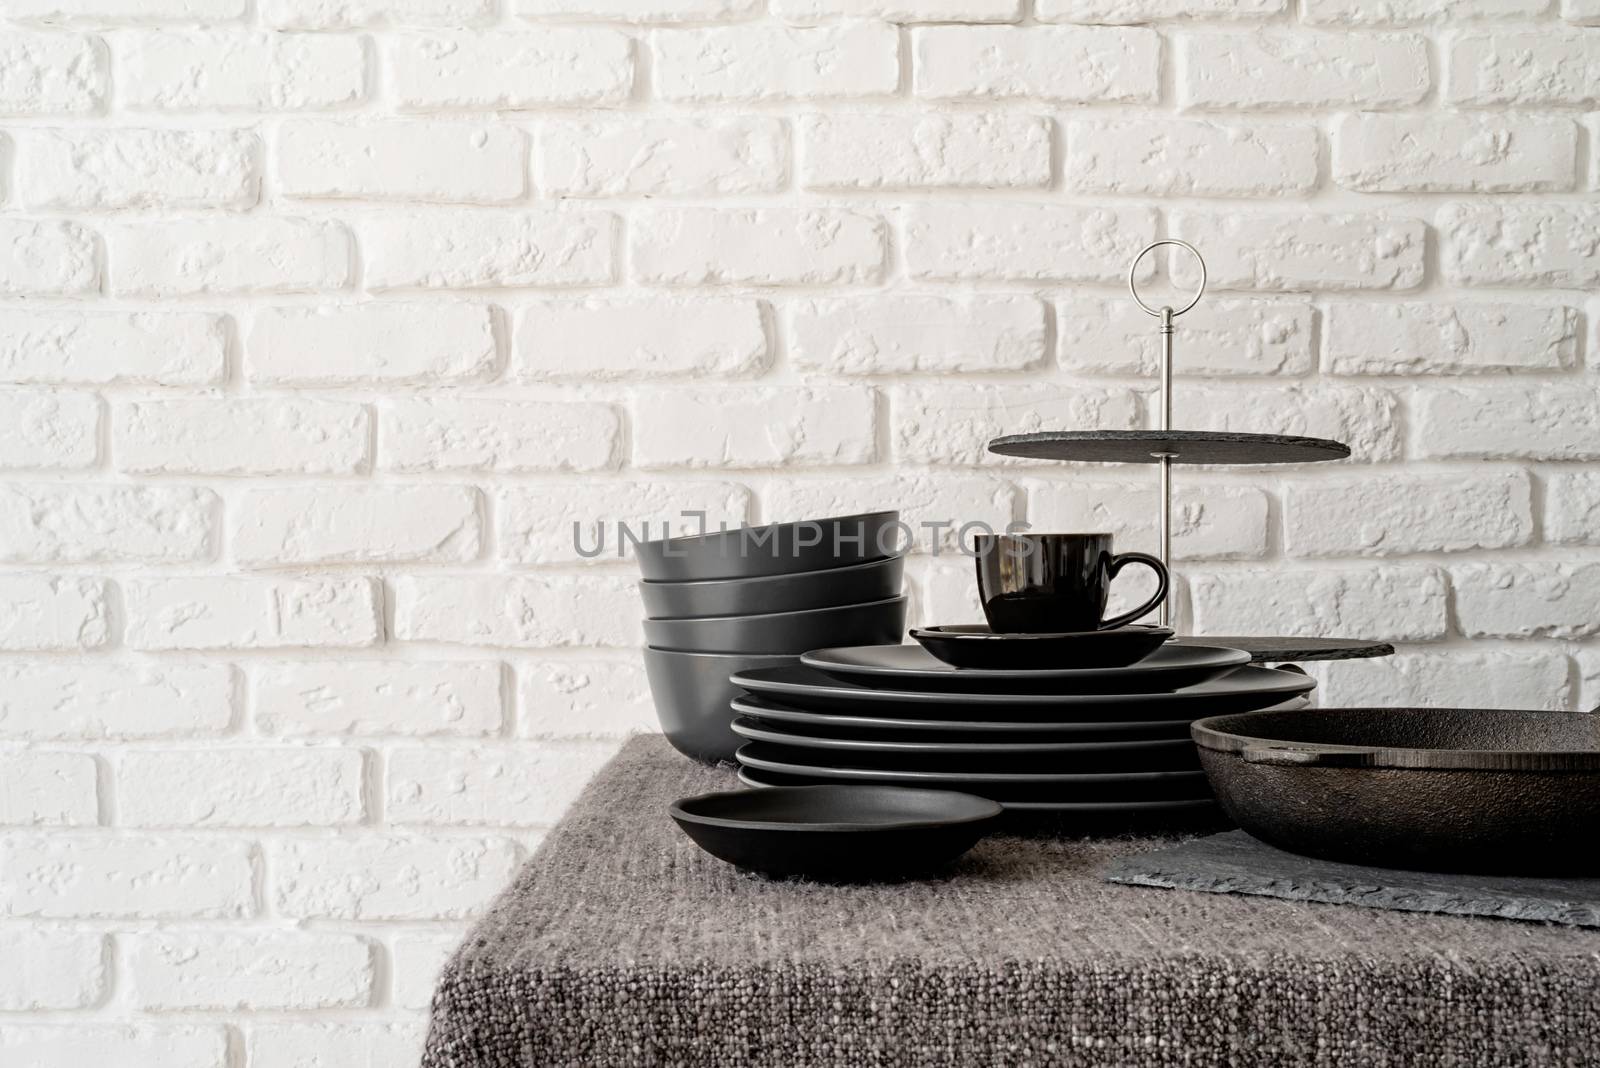 stack of black ceramic dishes and tableware on the table on white brick wall background by Desperada